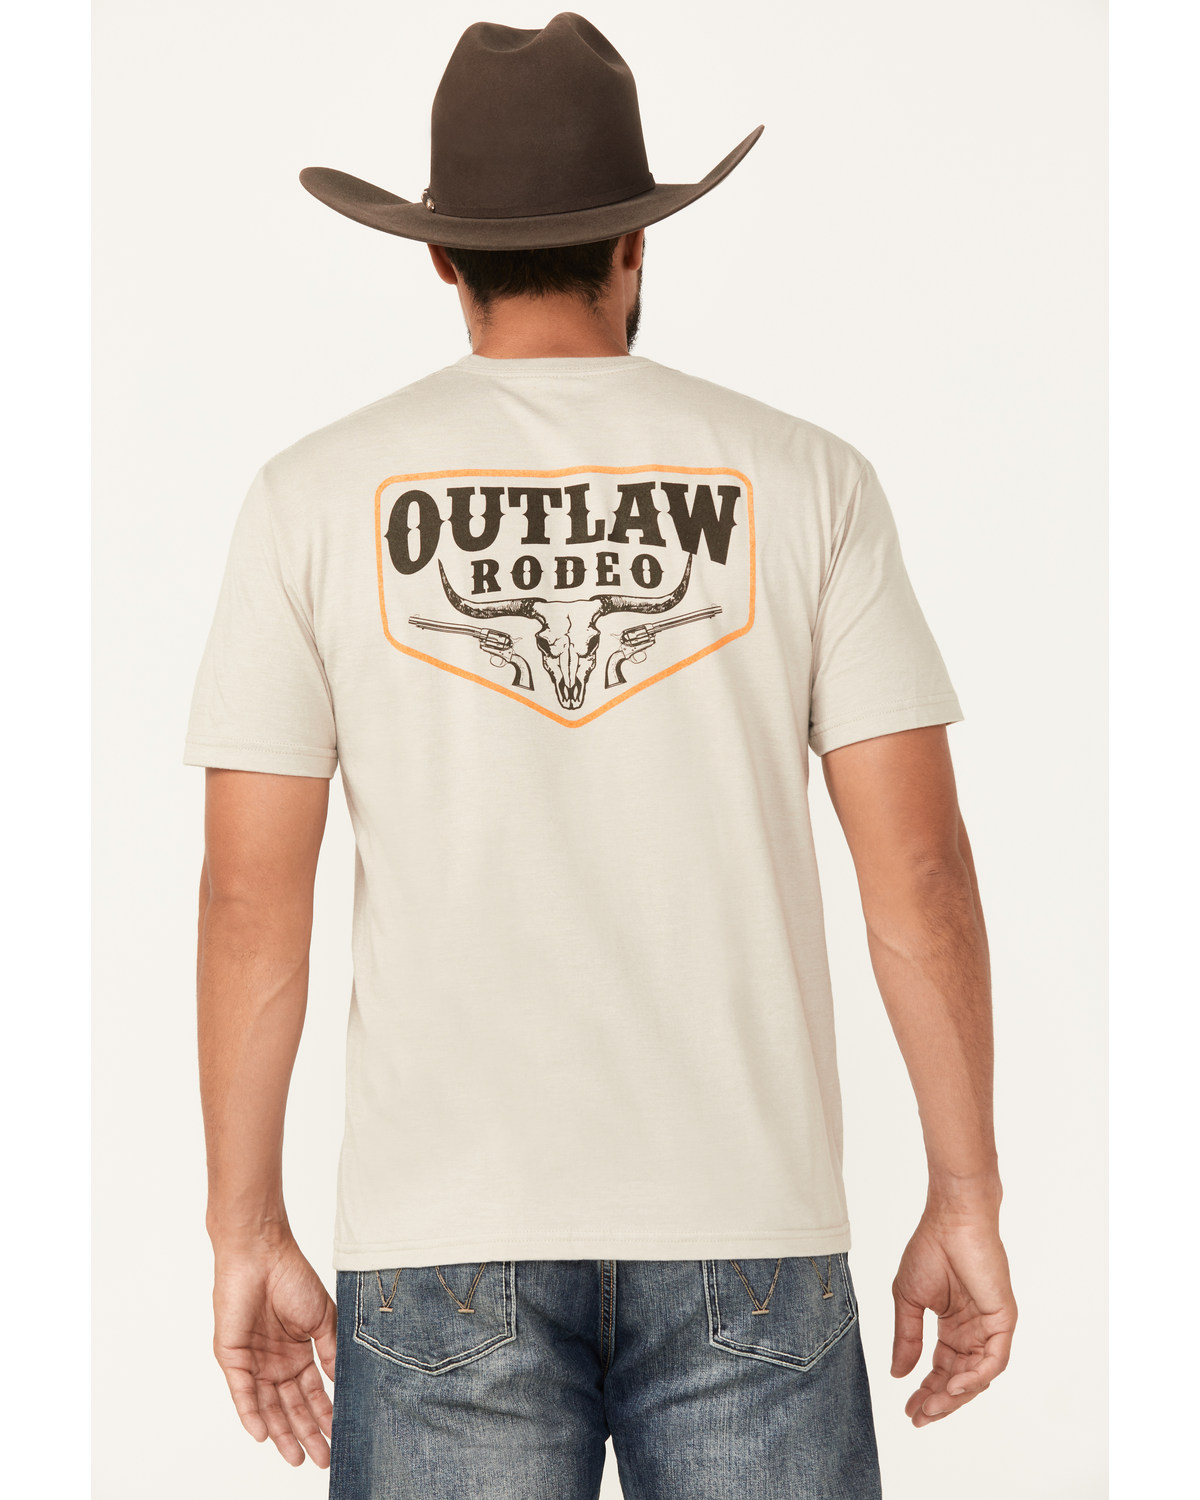 Cowboy Hardware Men's Outlaw Rodeo Short Sleeve Graphic T-Shirt